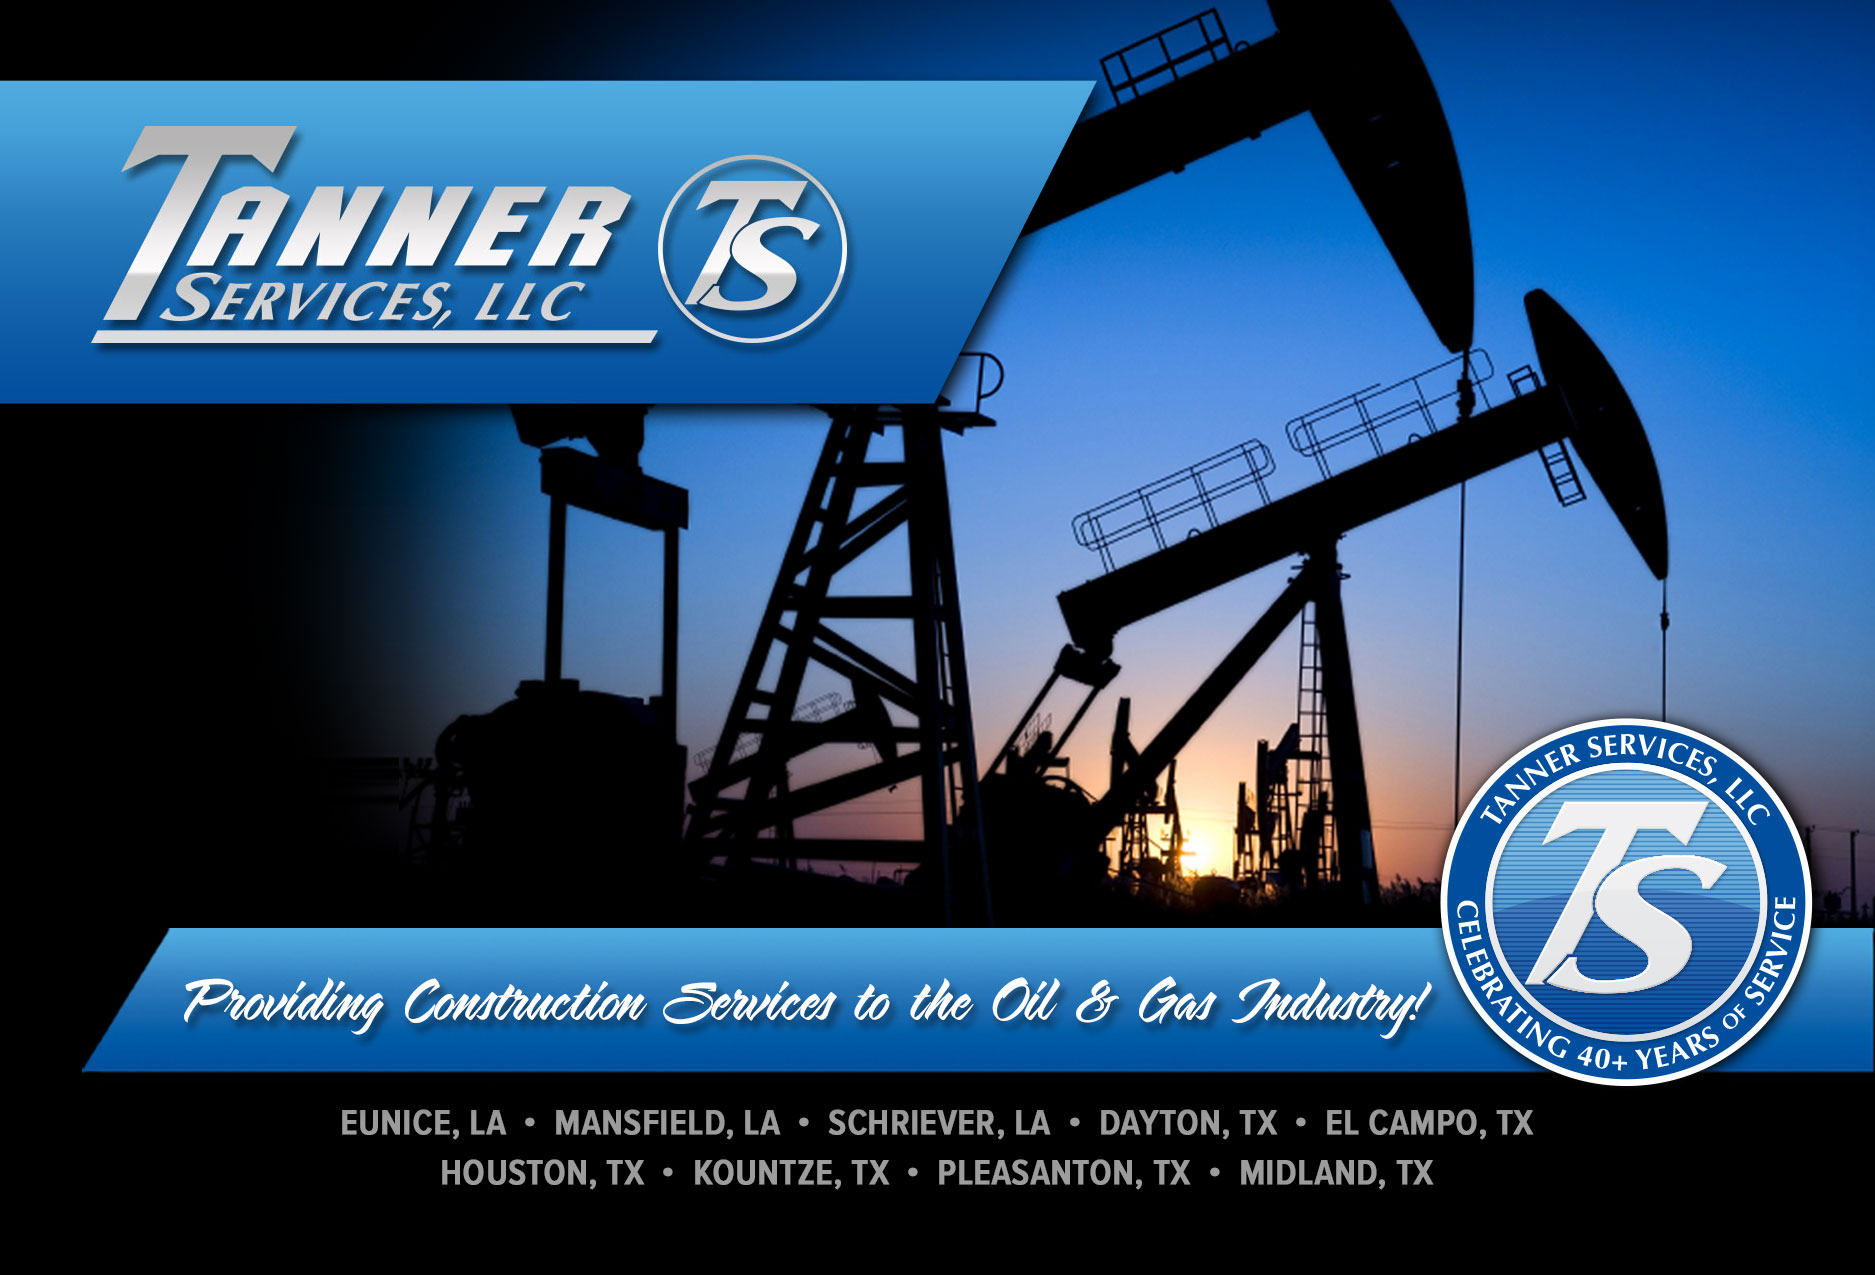 Tanner Services Providing Construction Services to the Oil and Gas Industry for Over 35 Years